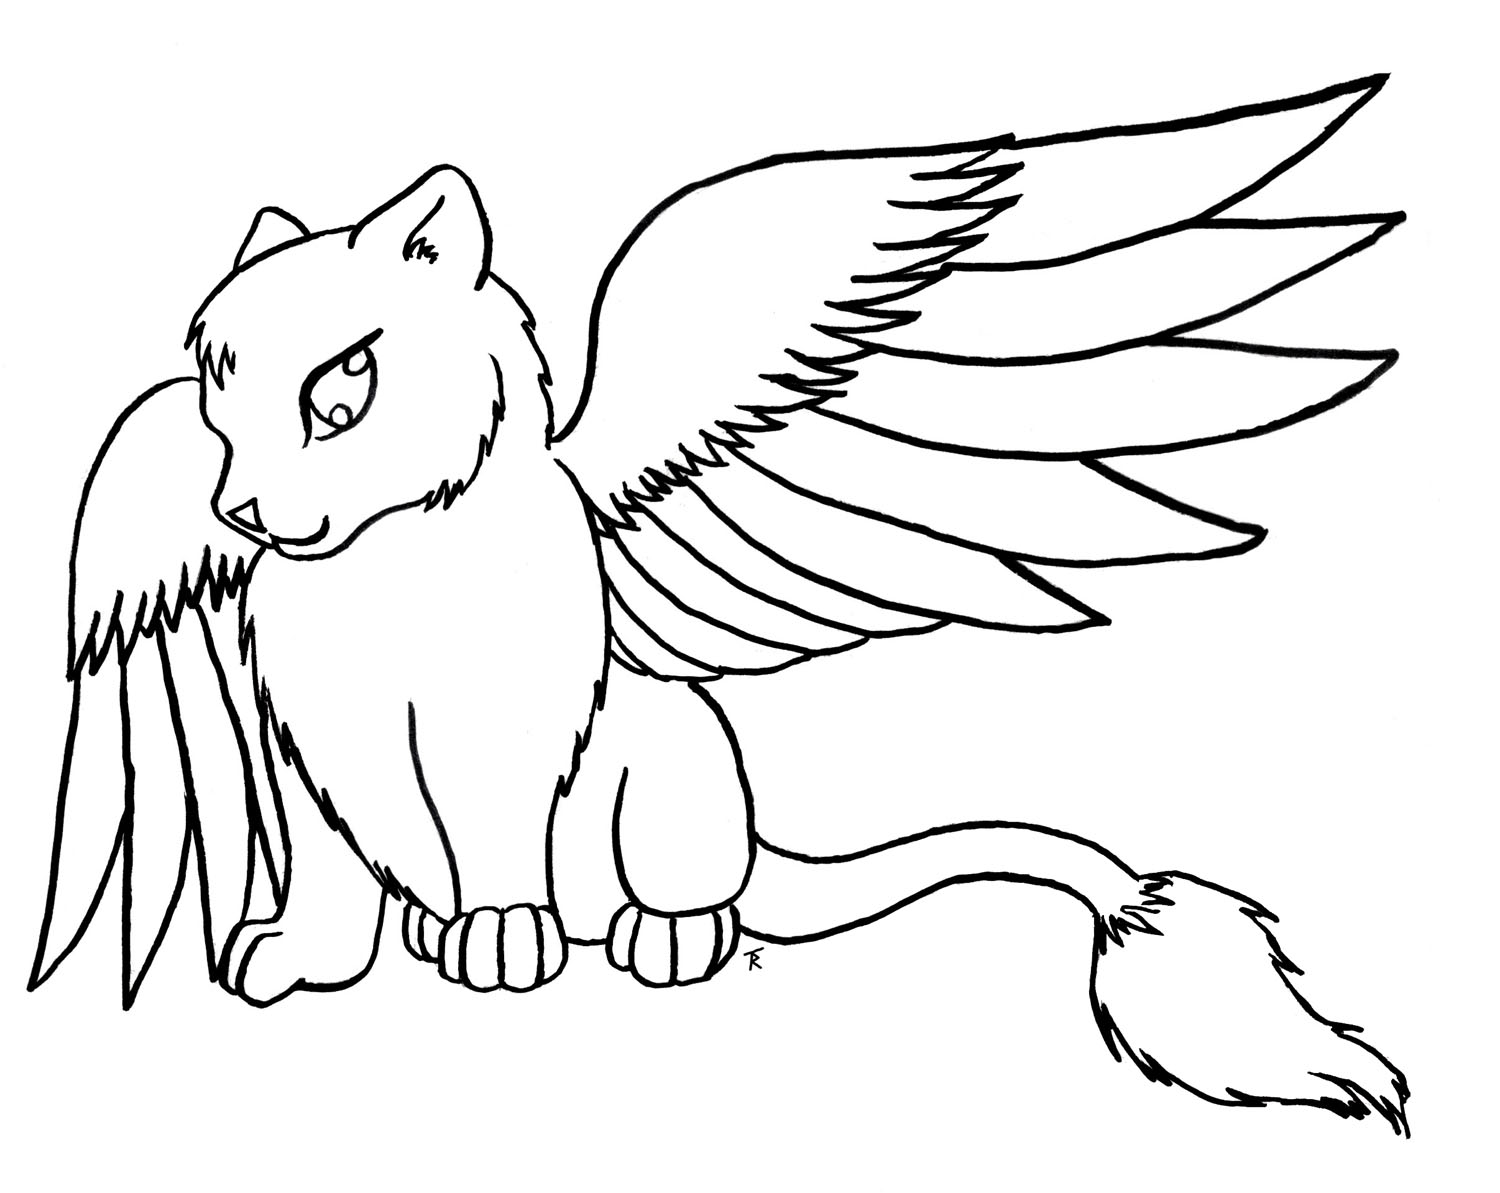 Color Me - Winged Cat Critter by TaelaDragonfox on DeviantArt